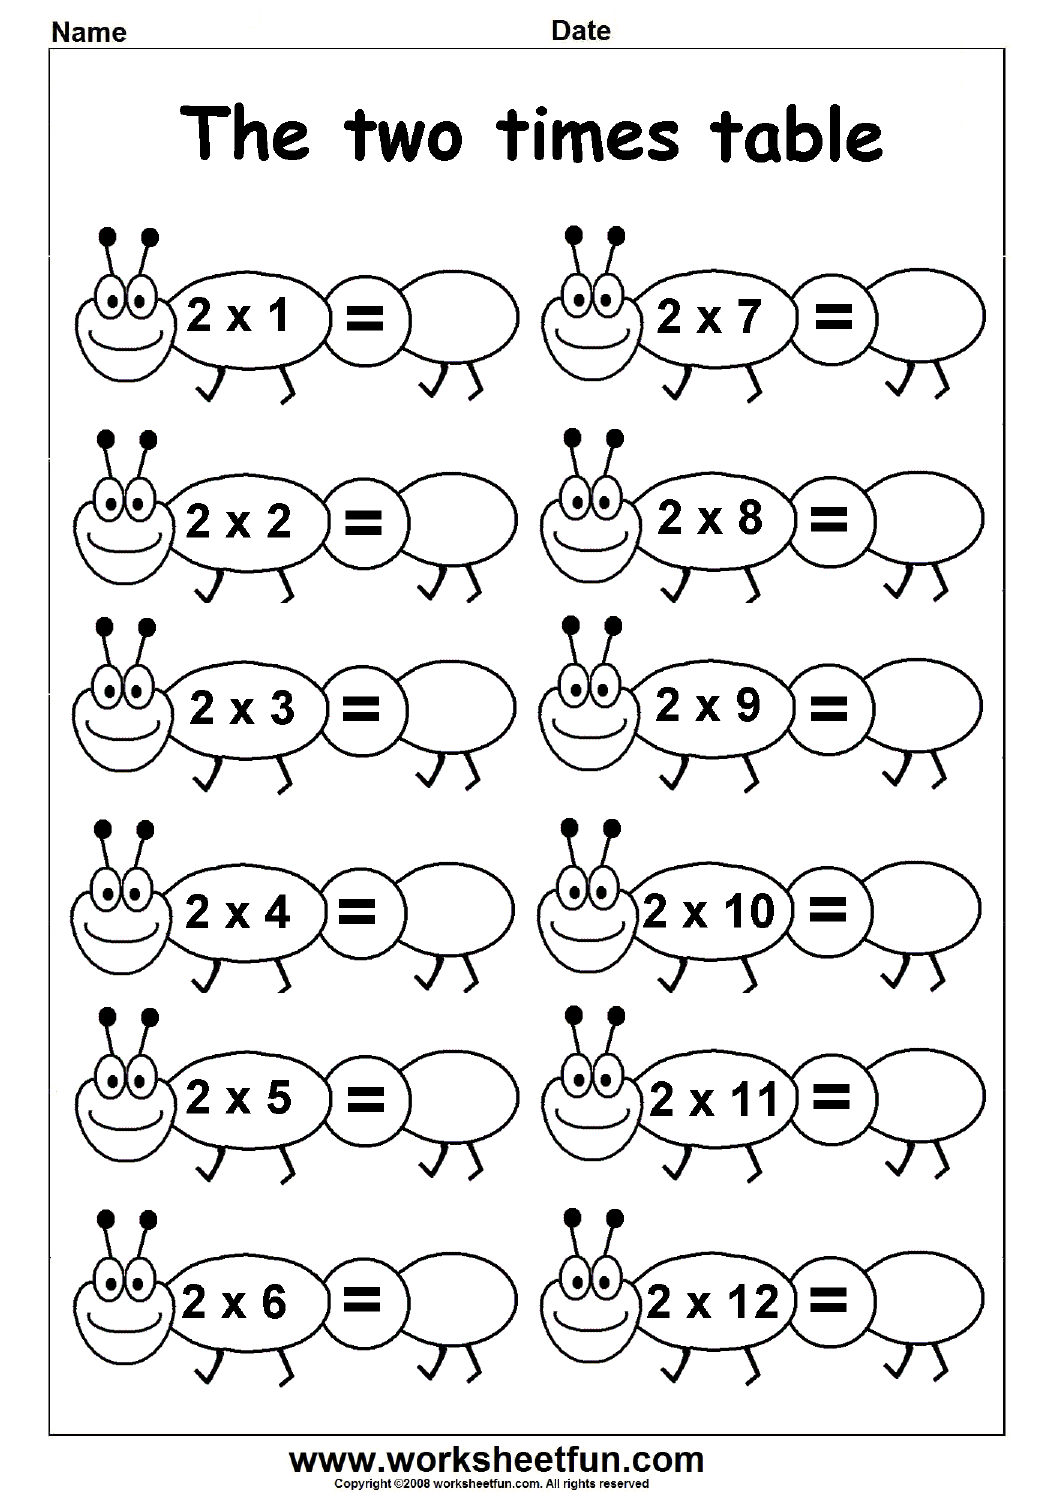 Multiplication Times Tables Worksheets 2, 3, 4, 5, 6 & 7 Times Tables